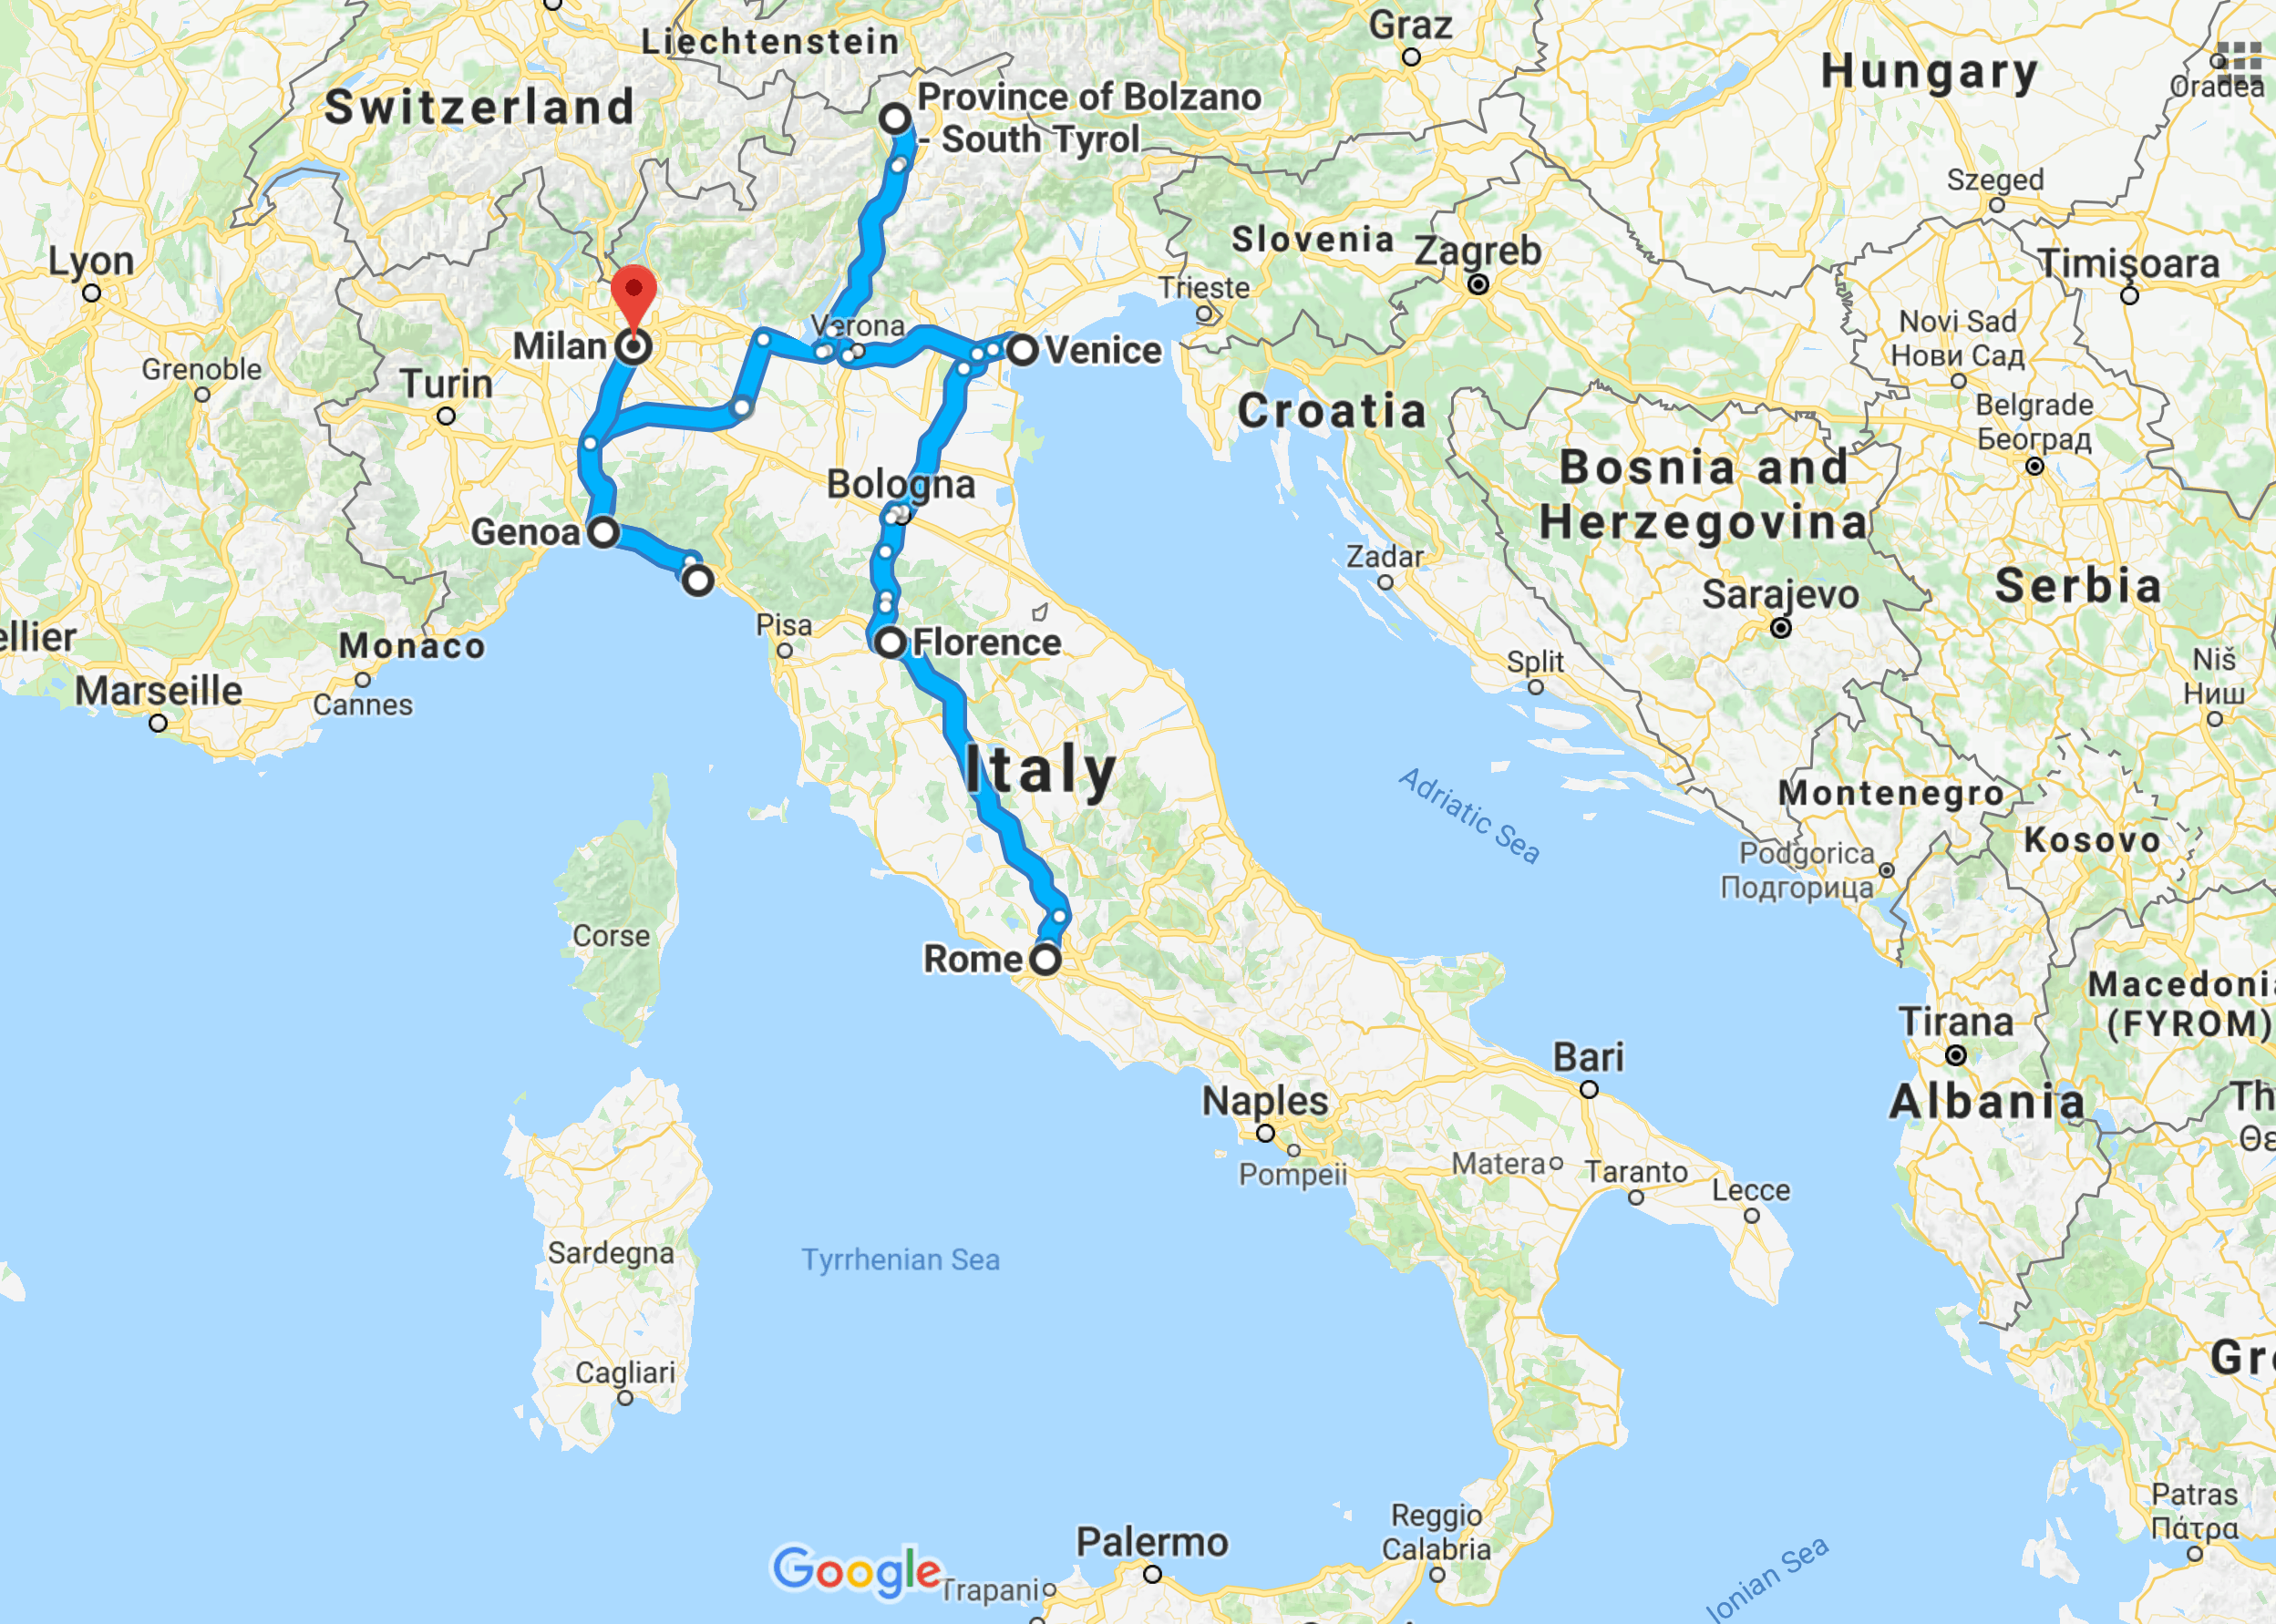 Google Maps screenshot of Italy showing the itinerary route.